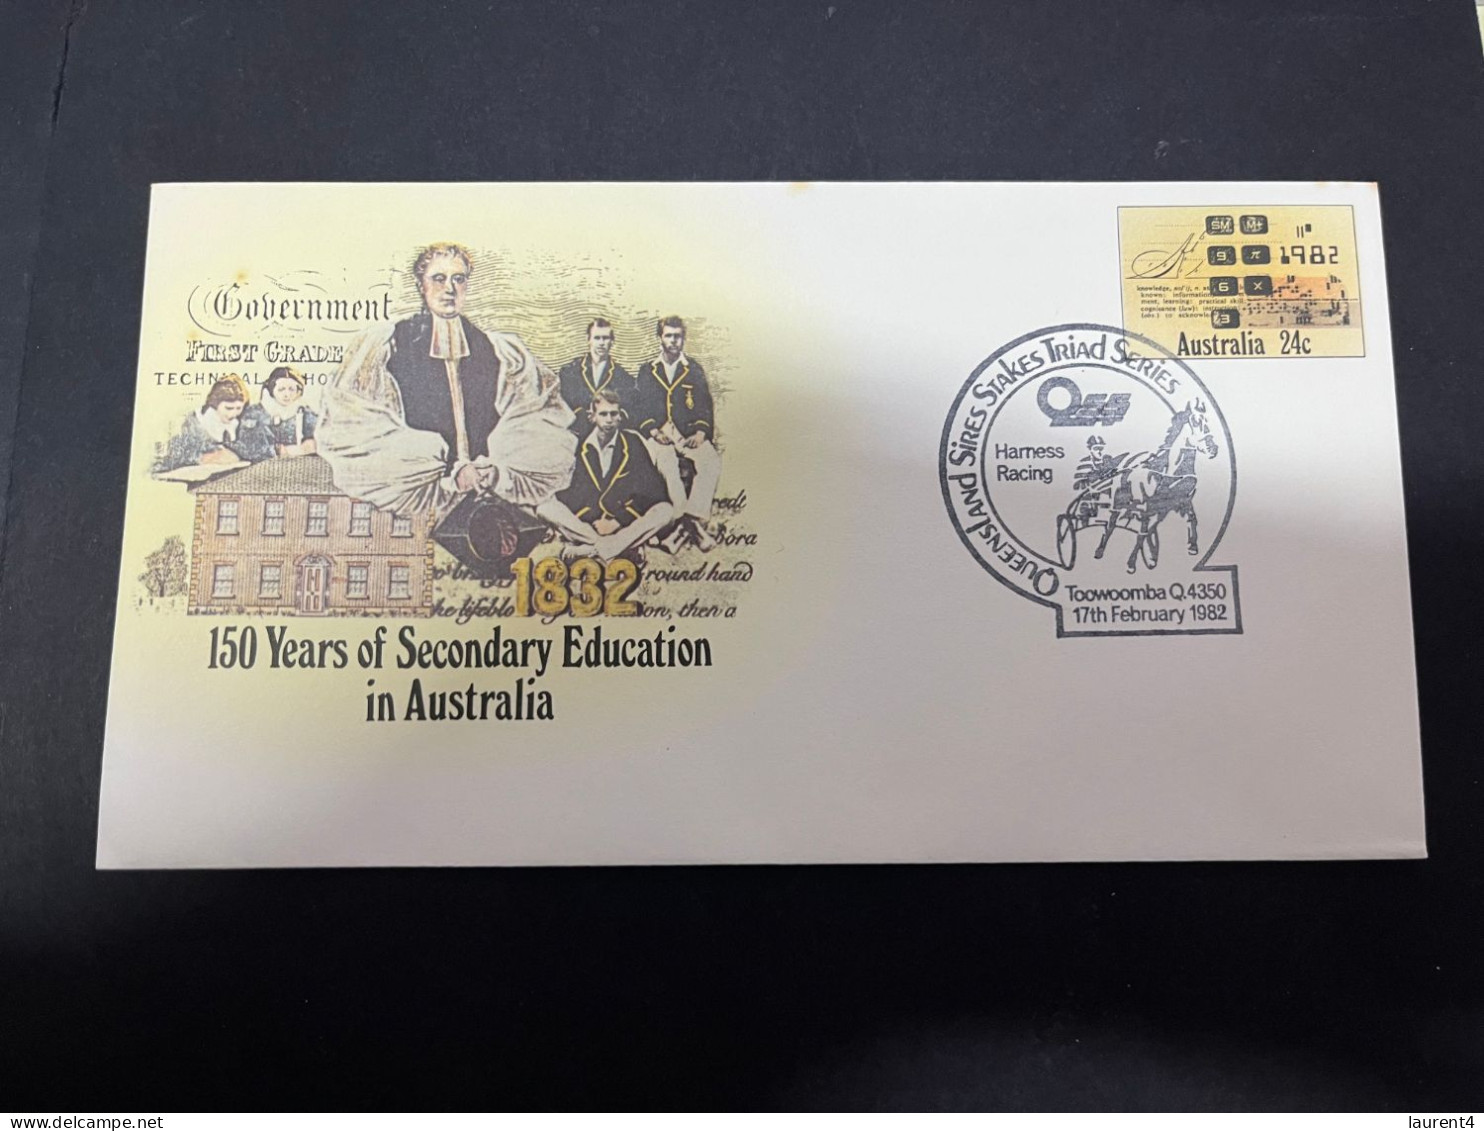 21-4-2024 (2 Z 39) Australia FDC Cover - 1982 - Harness Horse Racing In Queensland (Secondary Education) - FDC